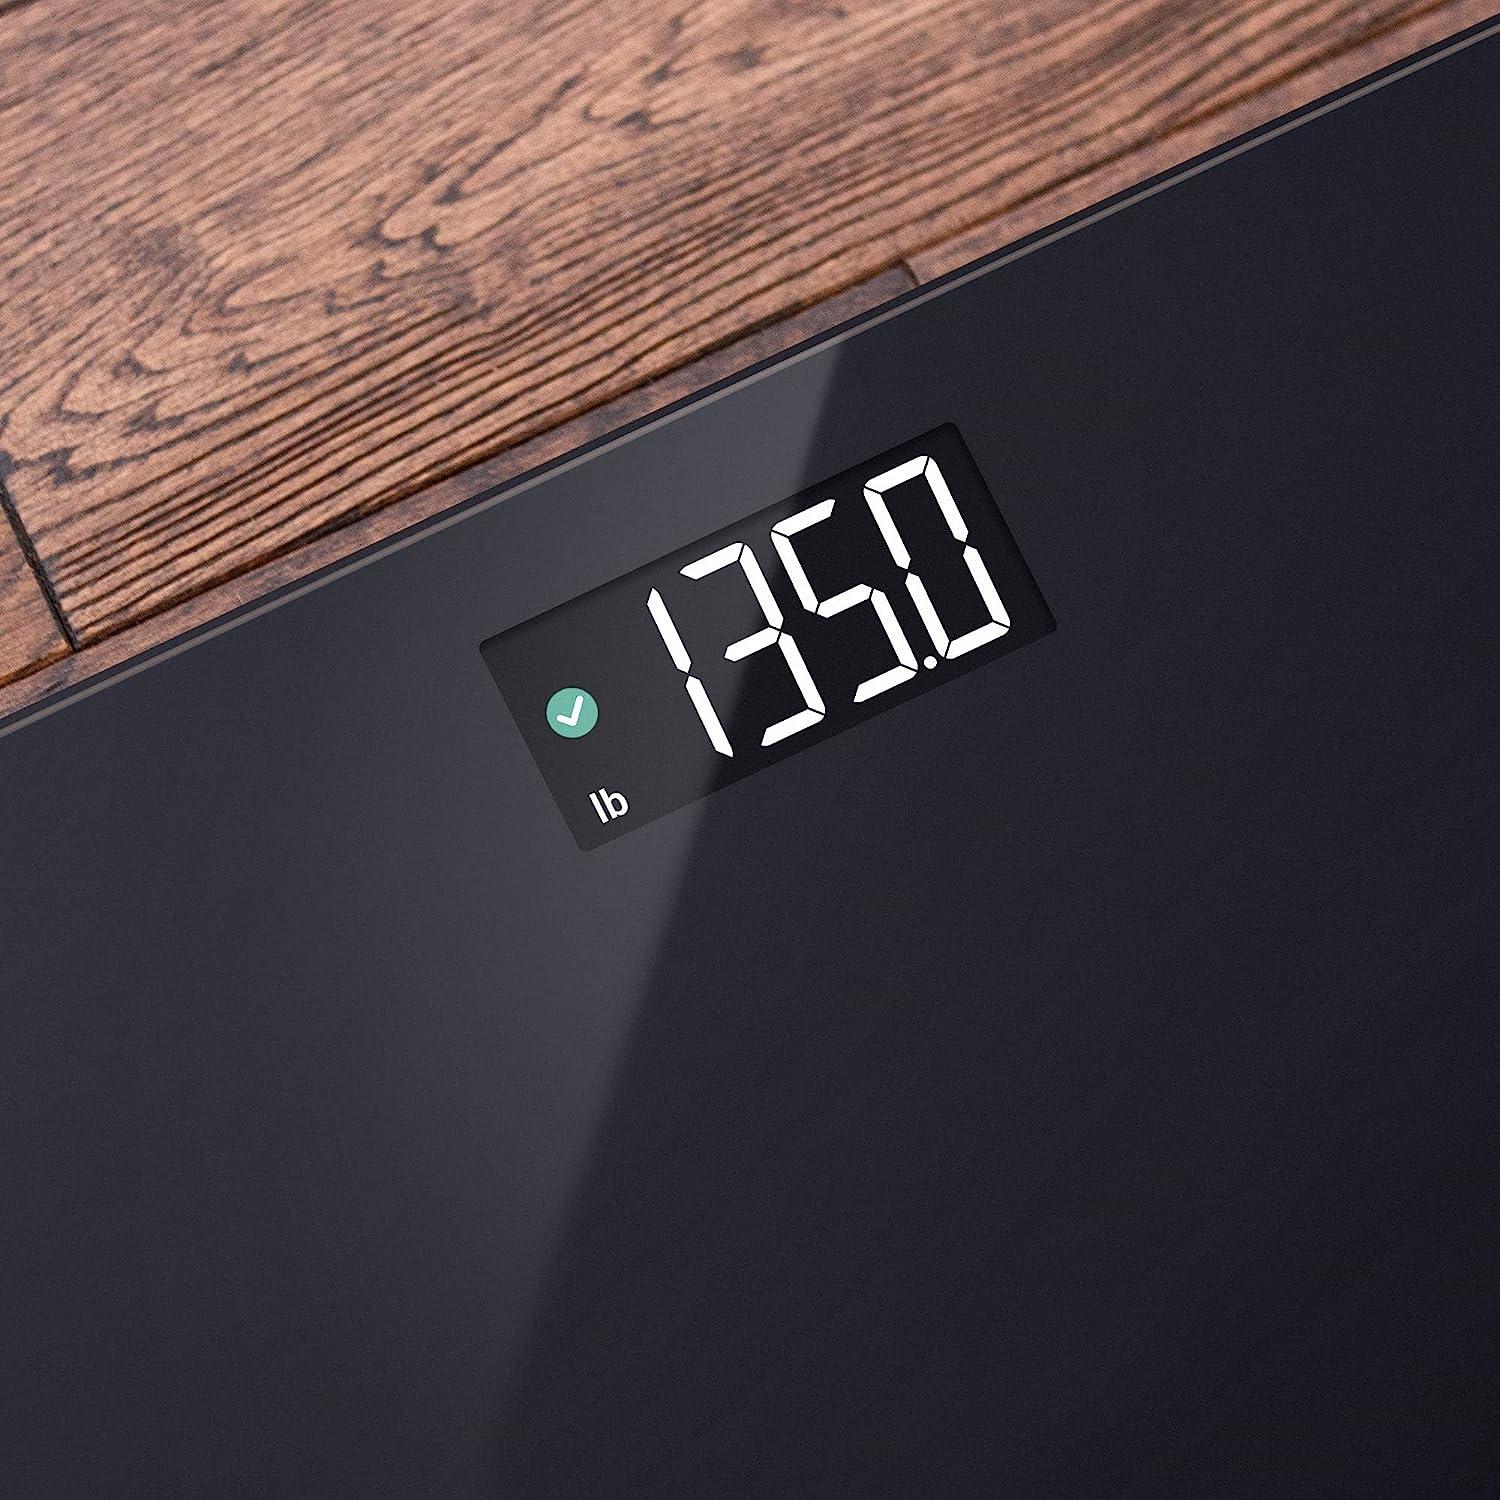 AccuCheck Digital Body Weight Scale from Greater Goods, Patent